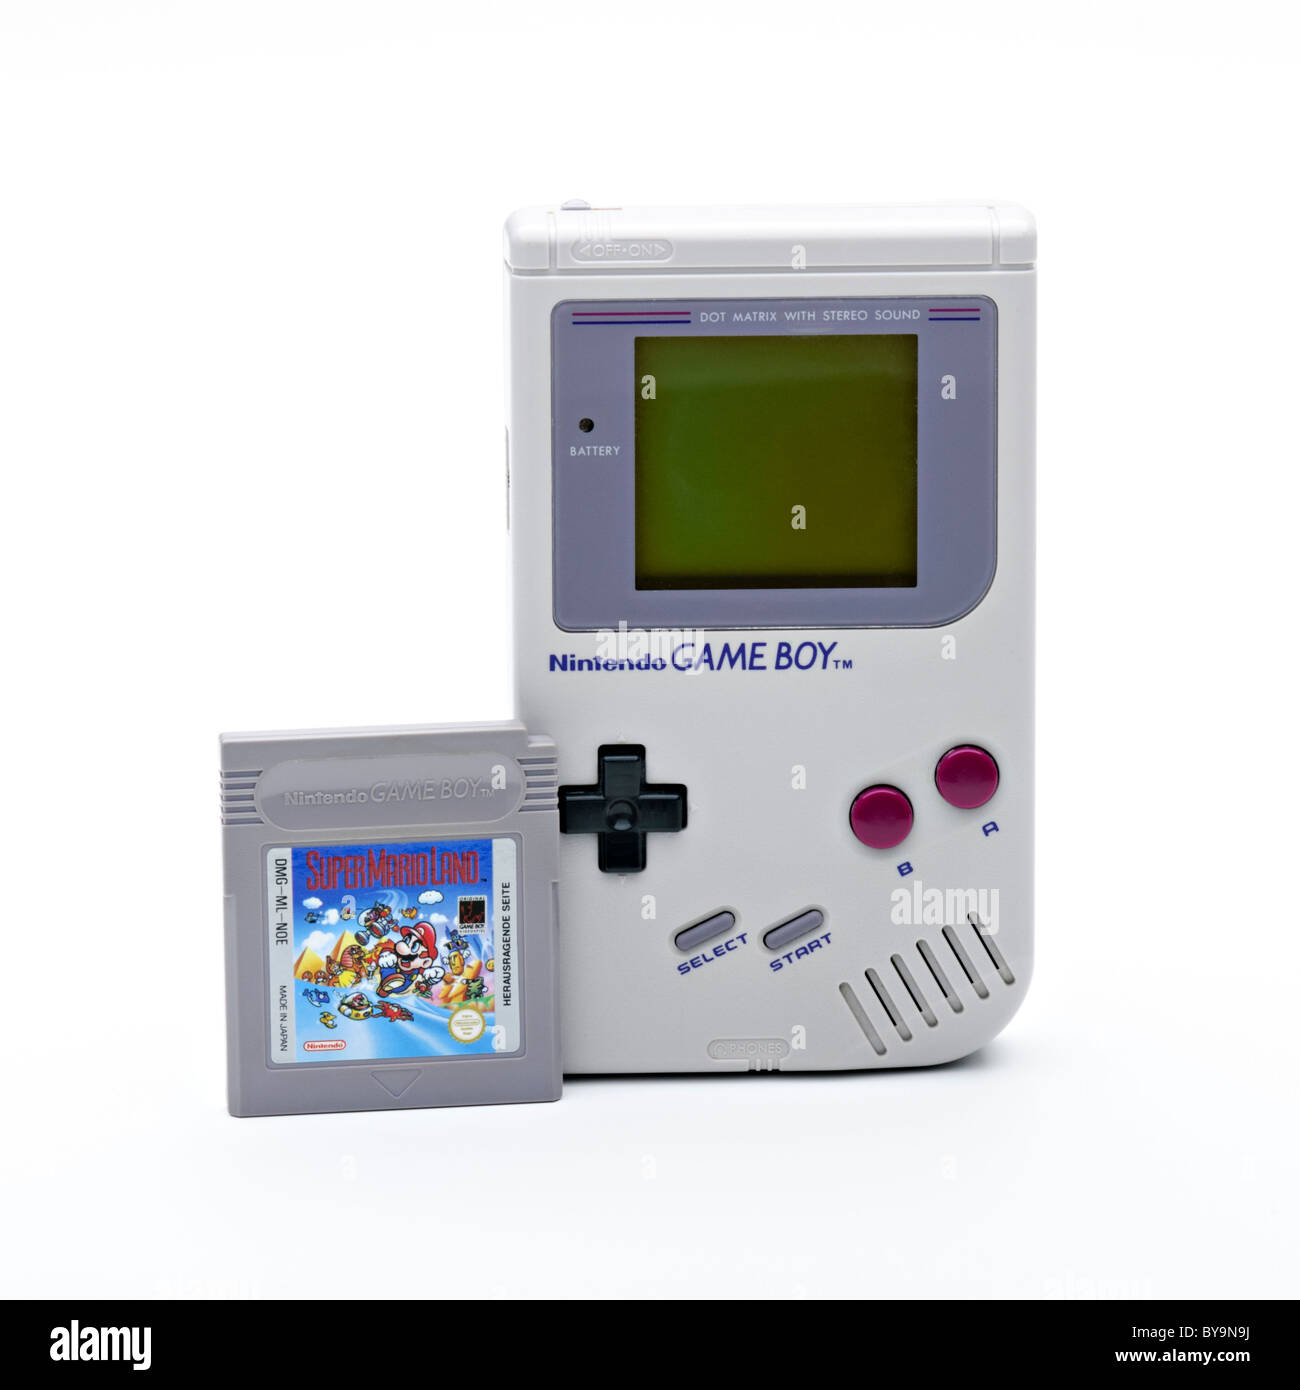 1989 Game Boy with Super Mario game cartridges Stock Photo